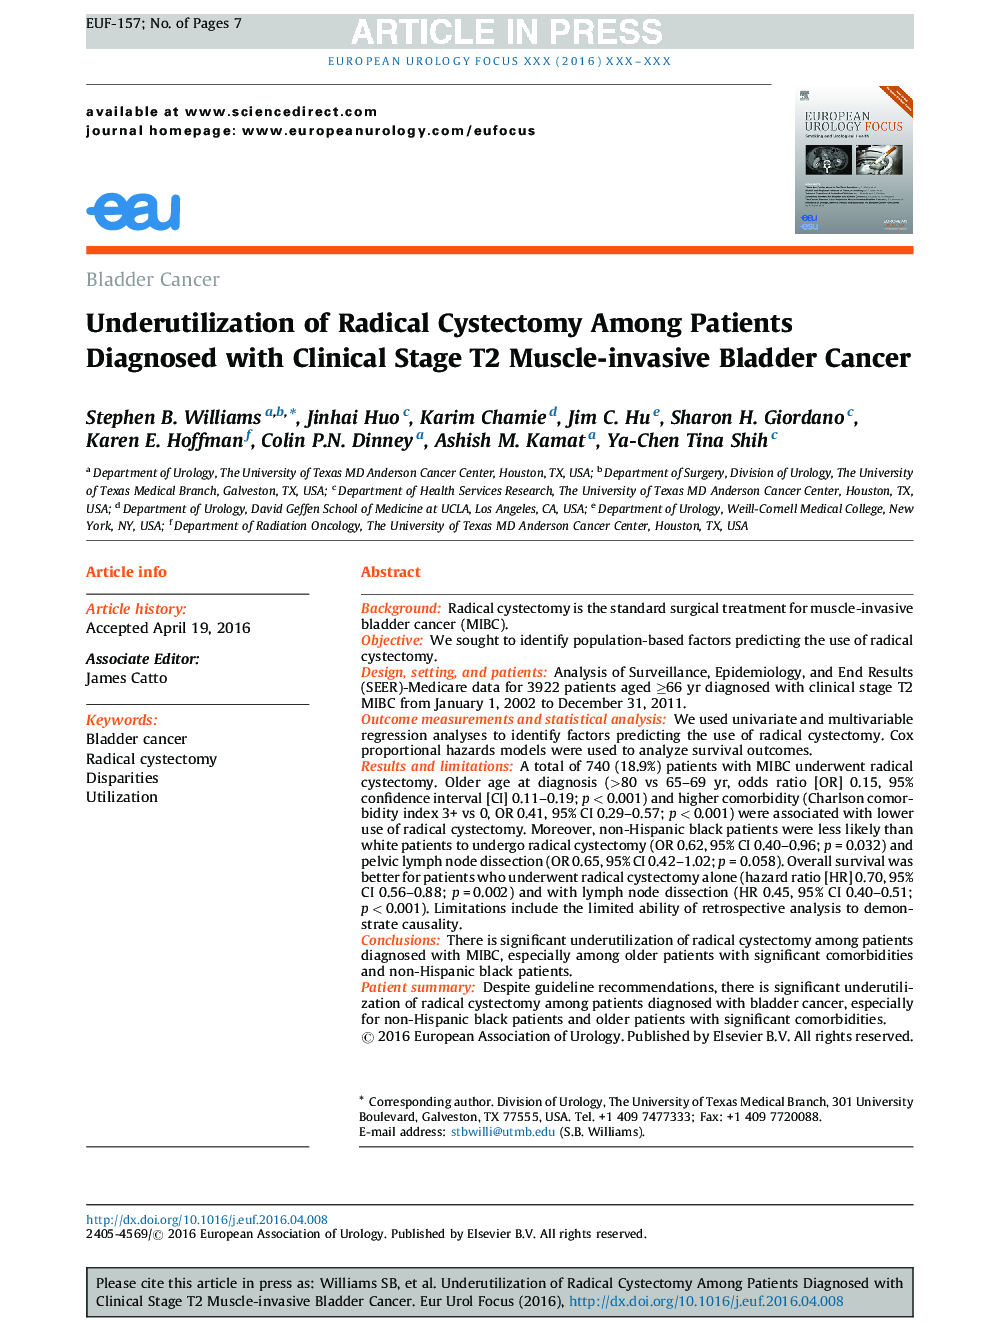 Underutilization of Radical Cystectomy Among Patients Diagnosed with Clinical Stage T2 Muscle-invasive Bladder Cancer